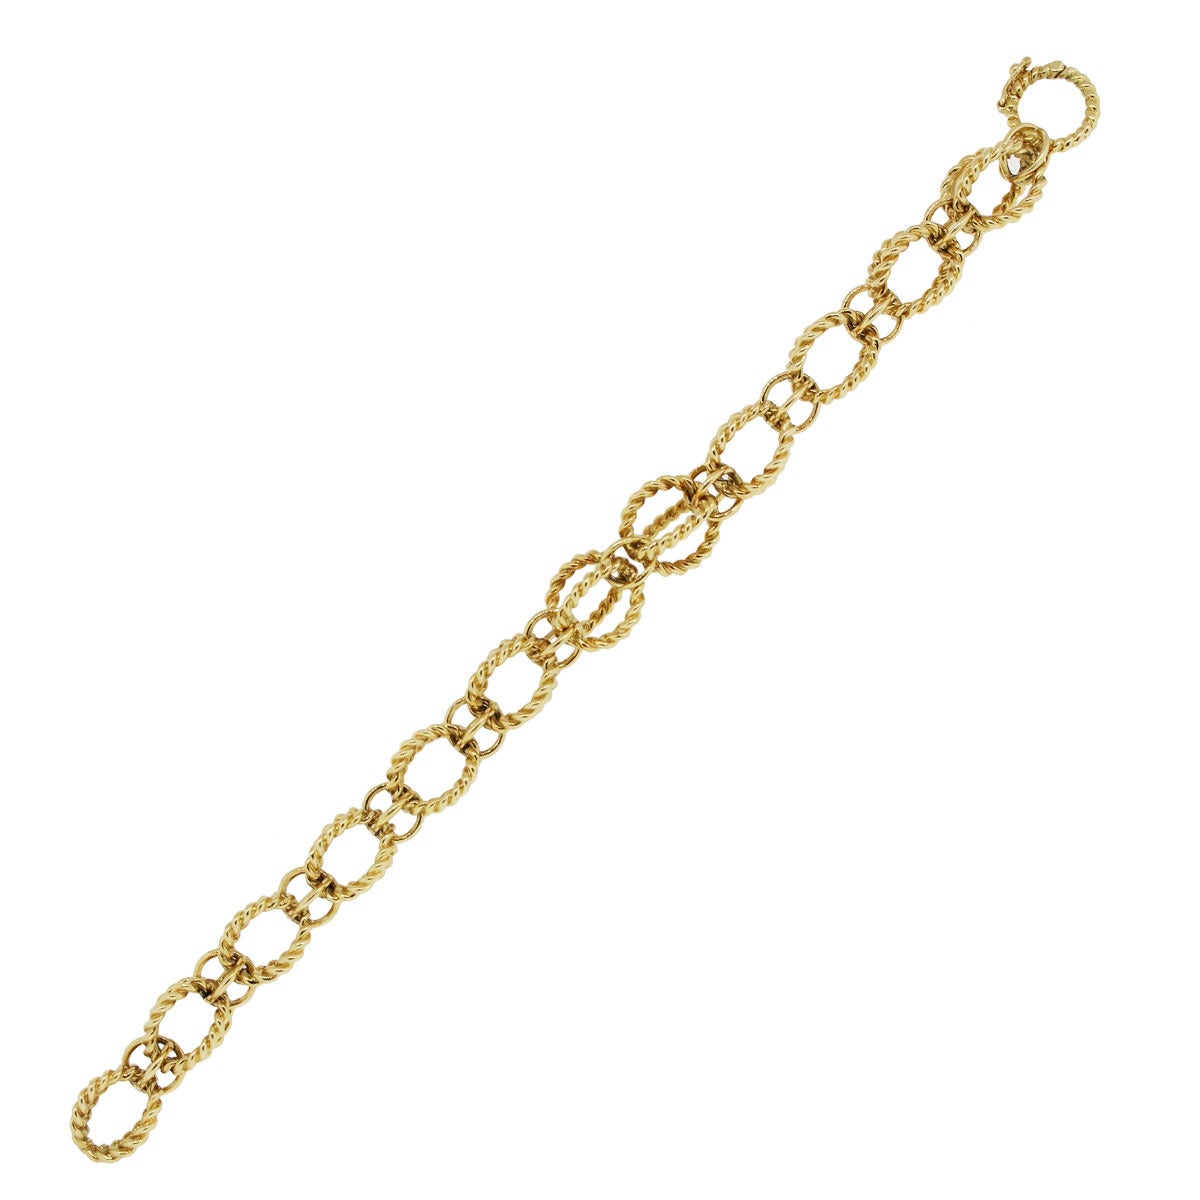 Designer: Tiffany & Co.
Style: Schlumberger Yellow Gold Circle Rope Bracelet 
Materials: 18k Yellow Gold
Clasp: Lever style with safetly clasp
Total Weight: 28.2dwt (43.9g)
Additional Details: Comes with Tiffany & Co. box!
SKU : G4517OARE